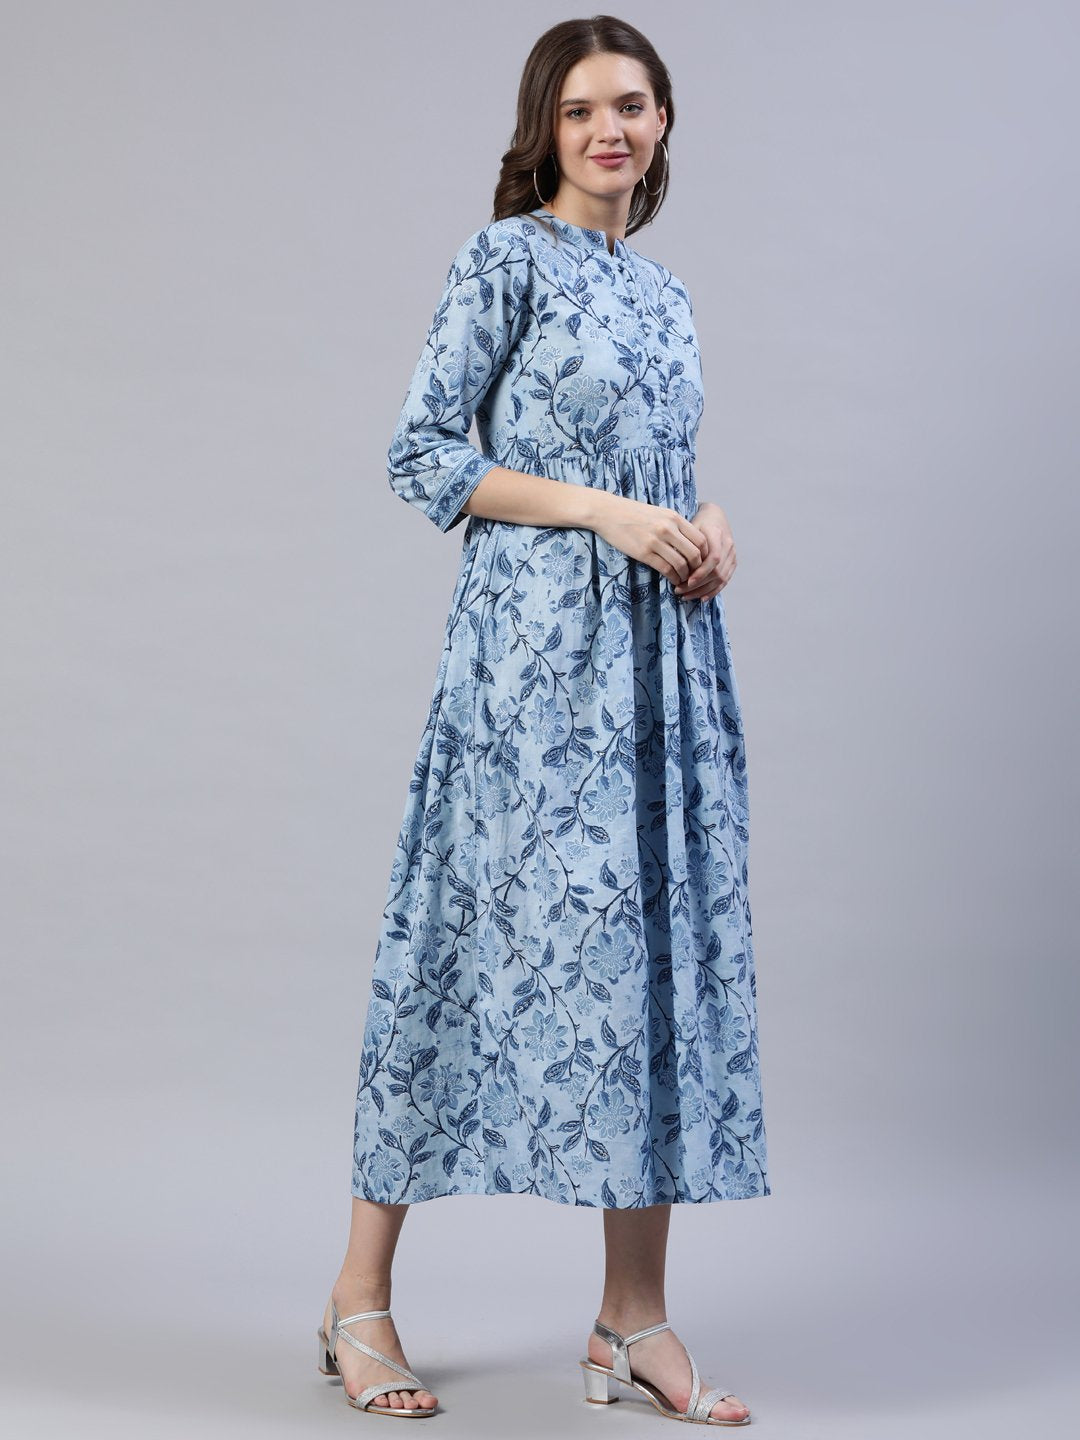 Women's Blue Floral Printed Dress With Three Quarter Sleeves - Nayo Clothing